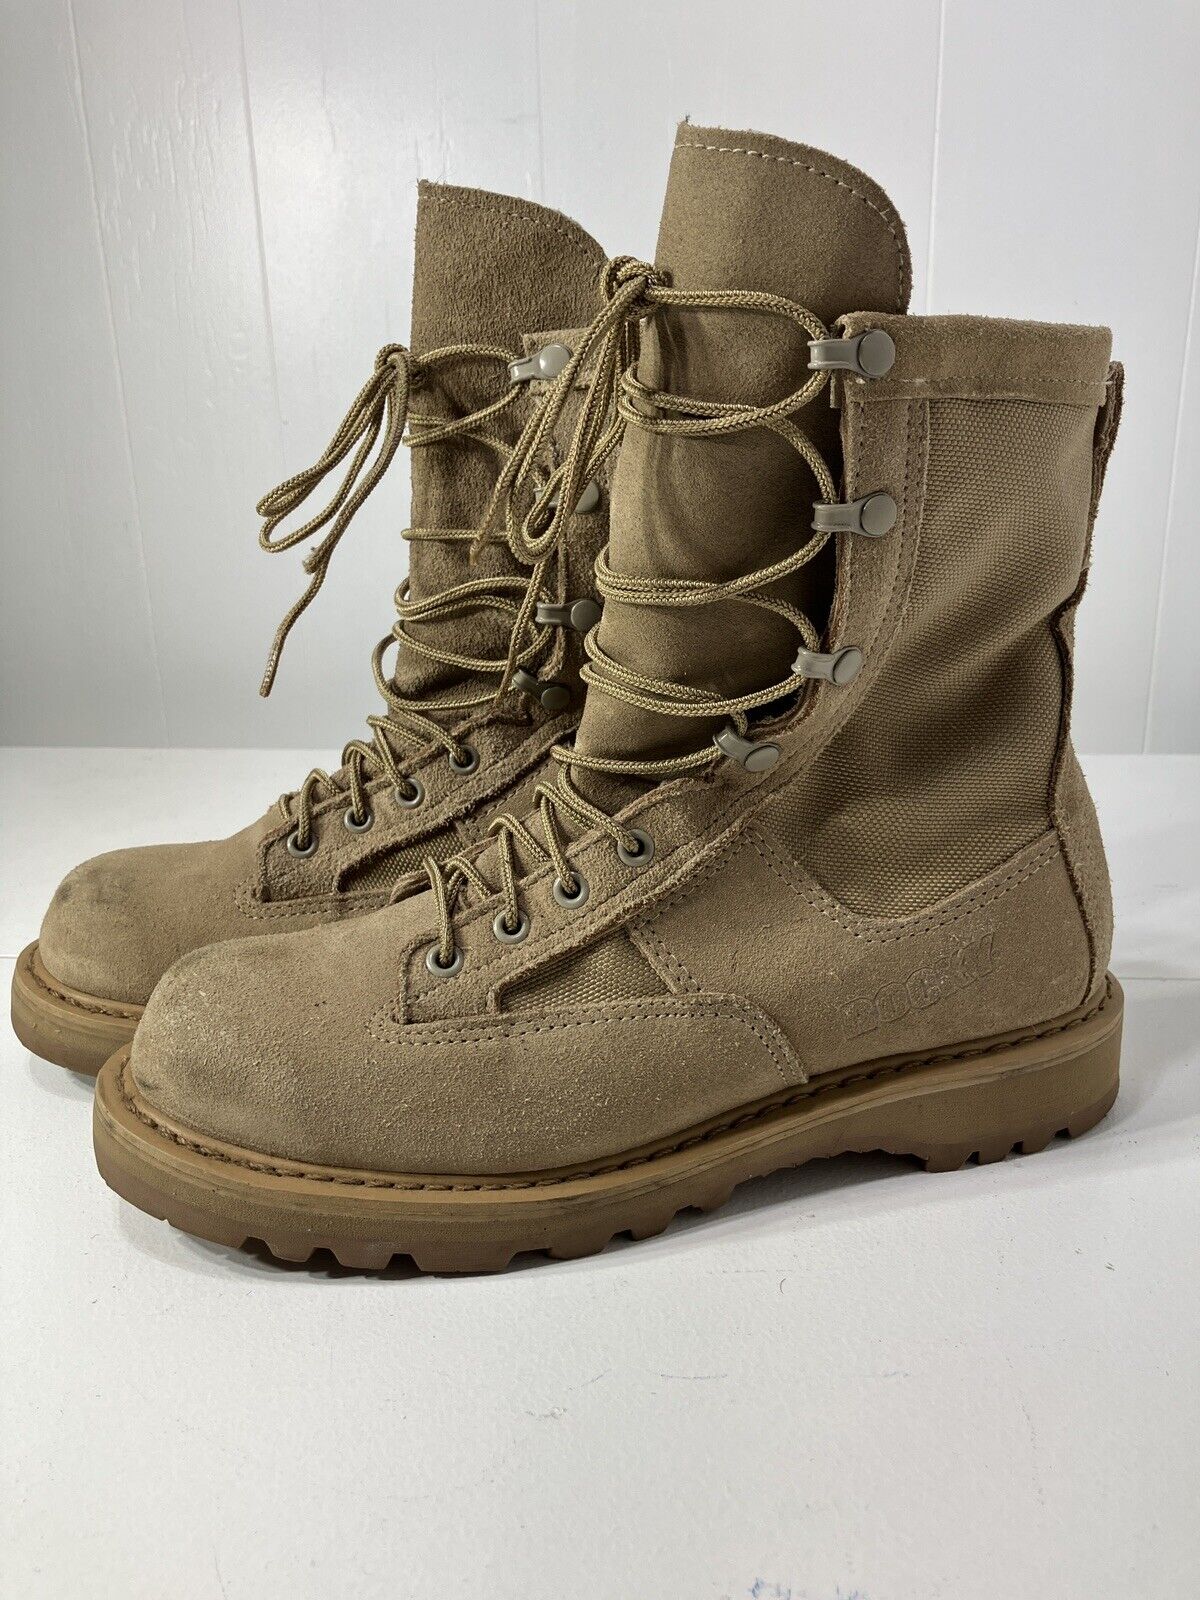 Military Combat Army Boots 790G Mens 7.5 Breathable Rocky Vibram Soles Tan Suede